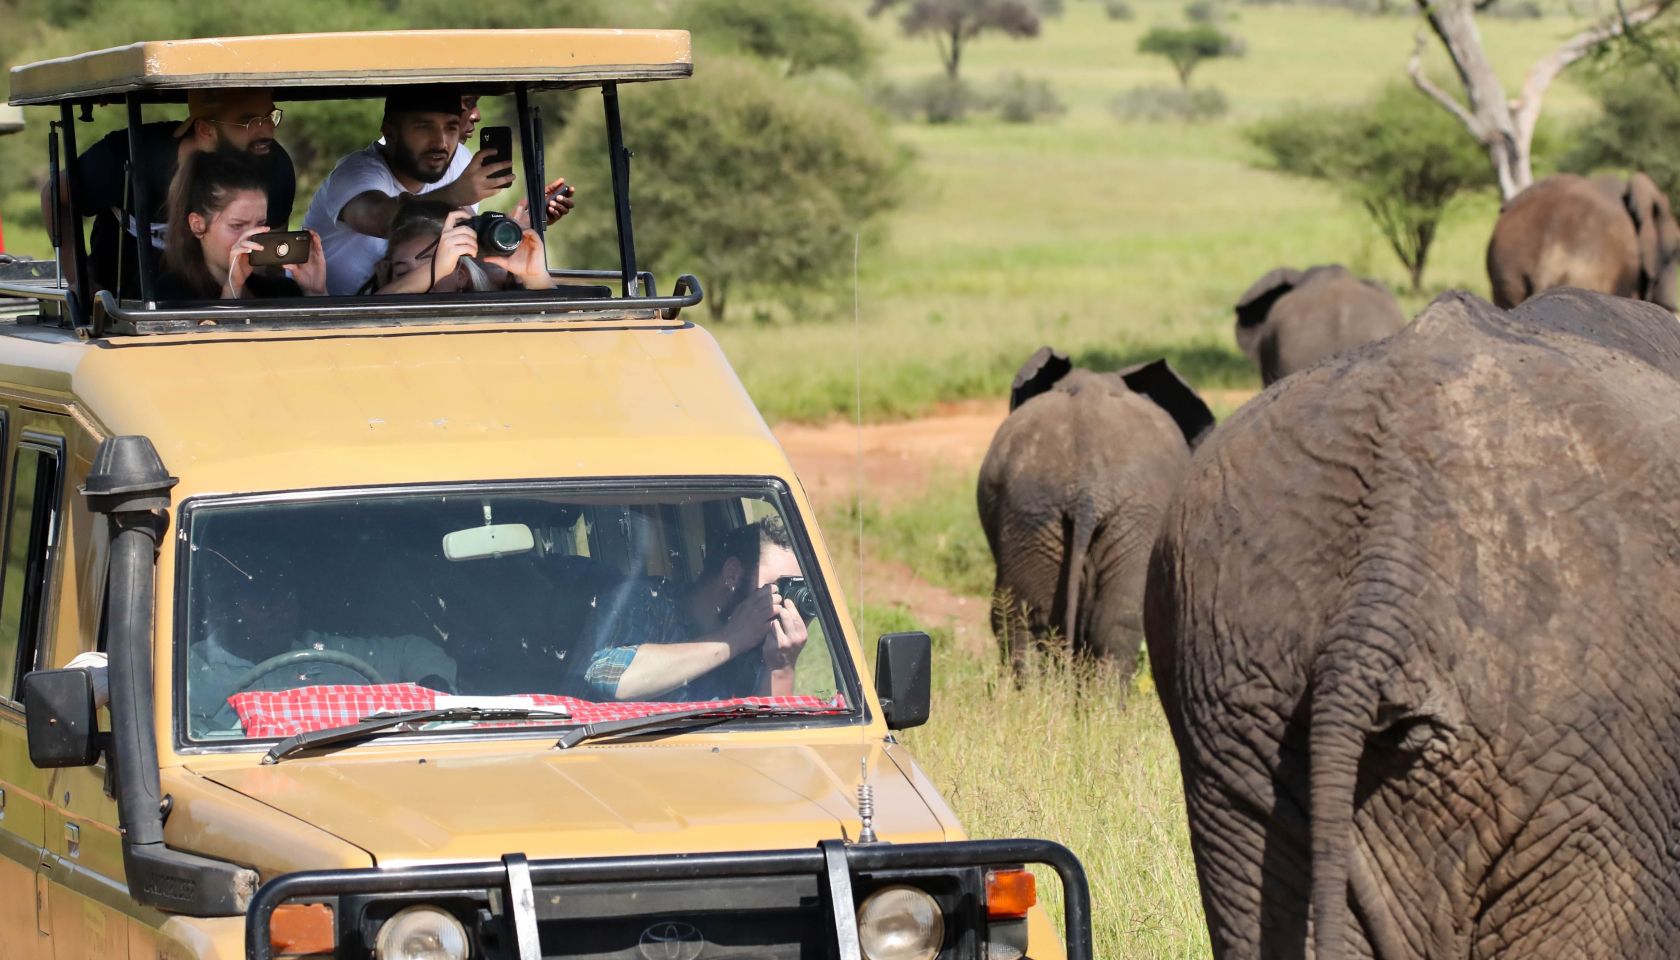 People in car taking pictures of elephants